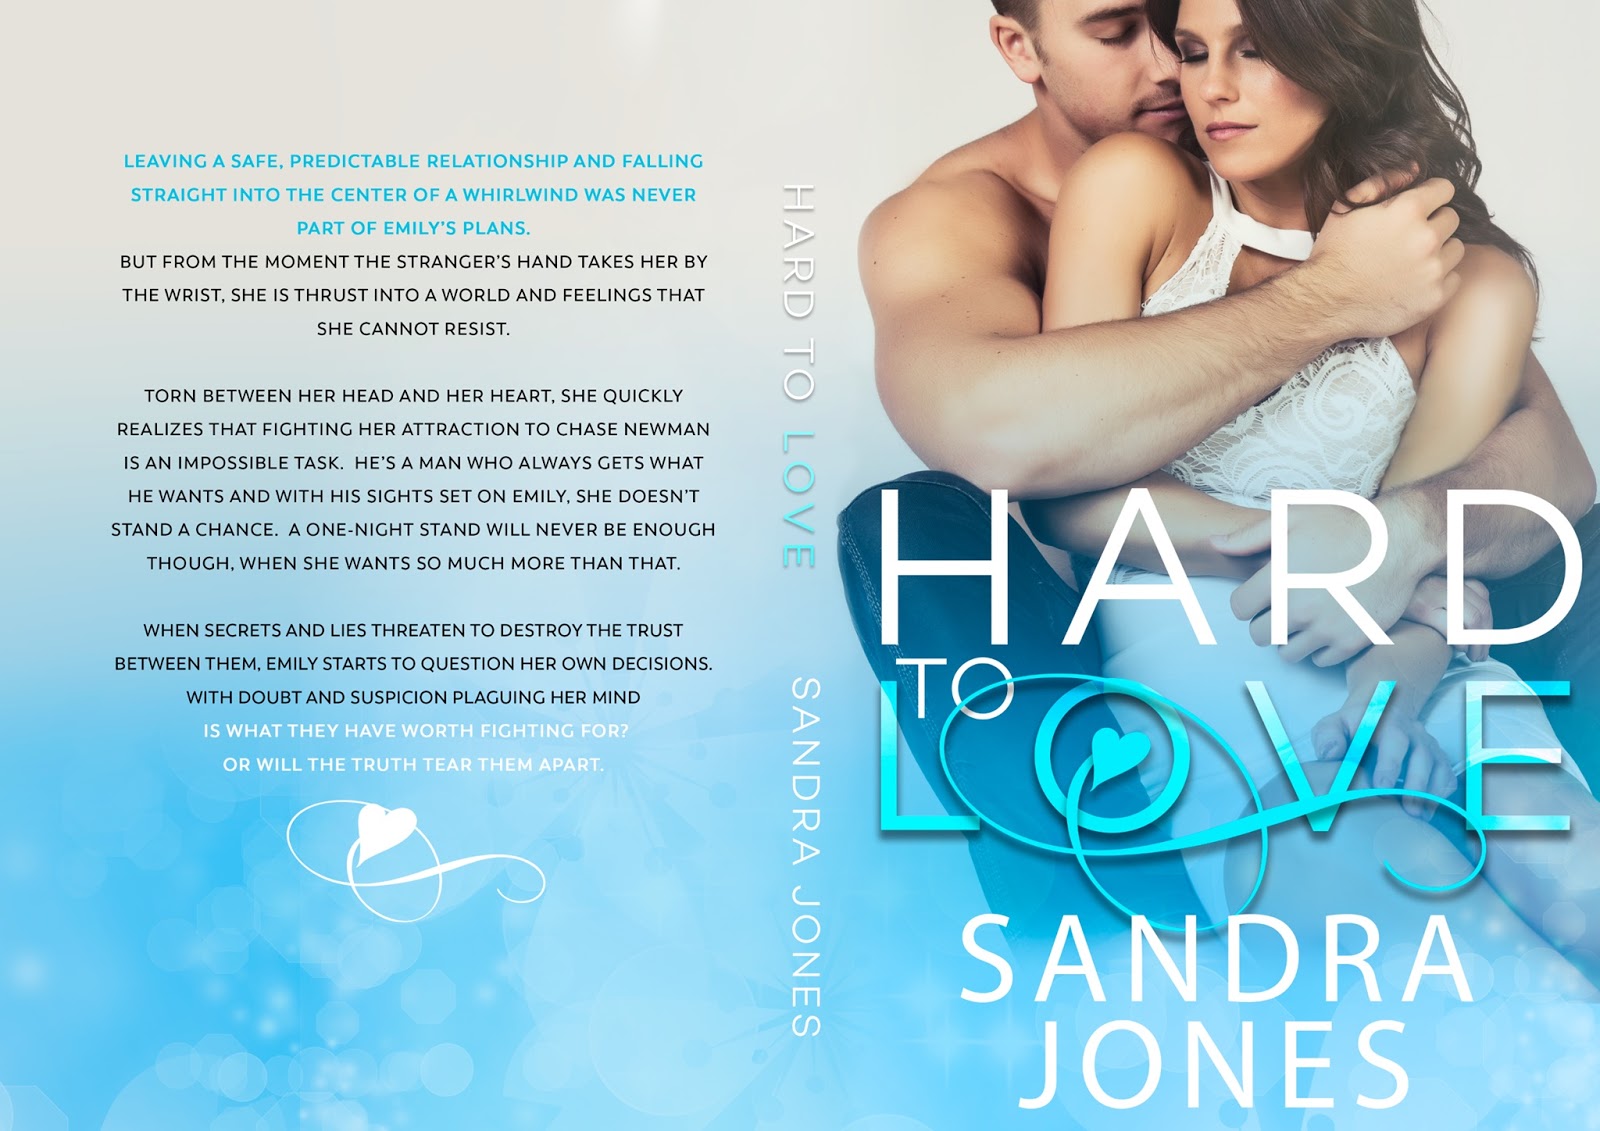 Hard to Love. She wants more and more!. Процент людей one Night Stand. Stand a chance